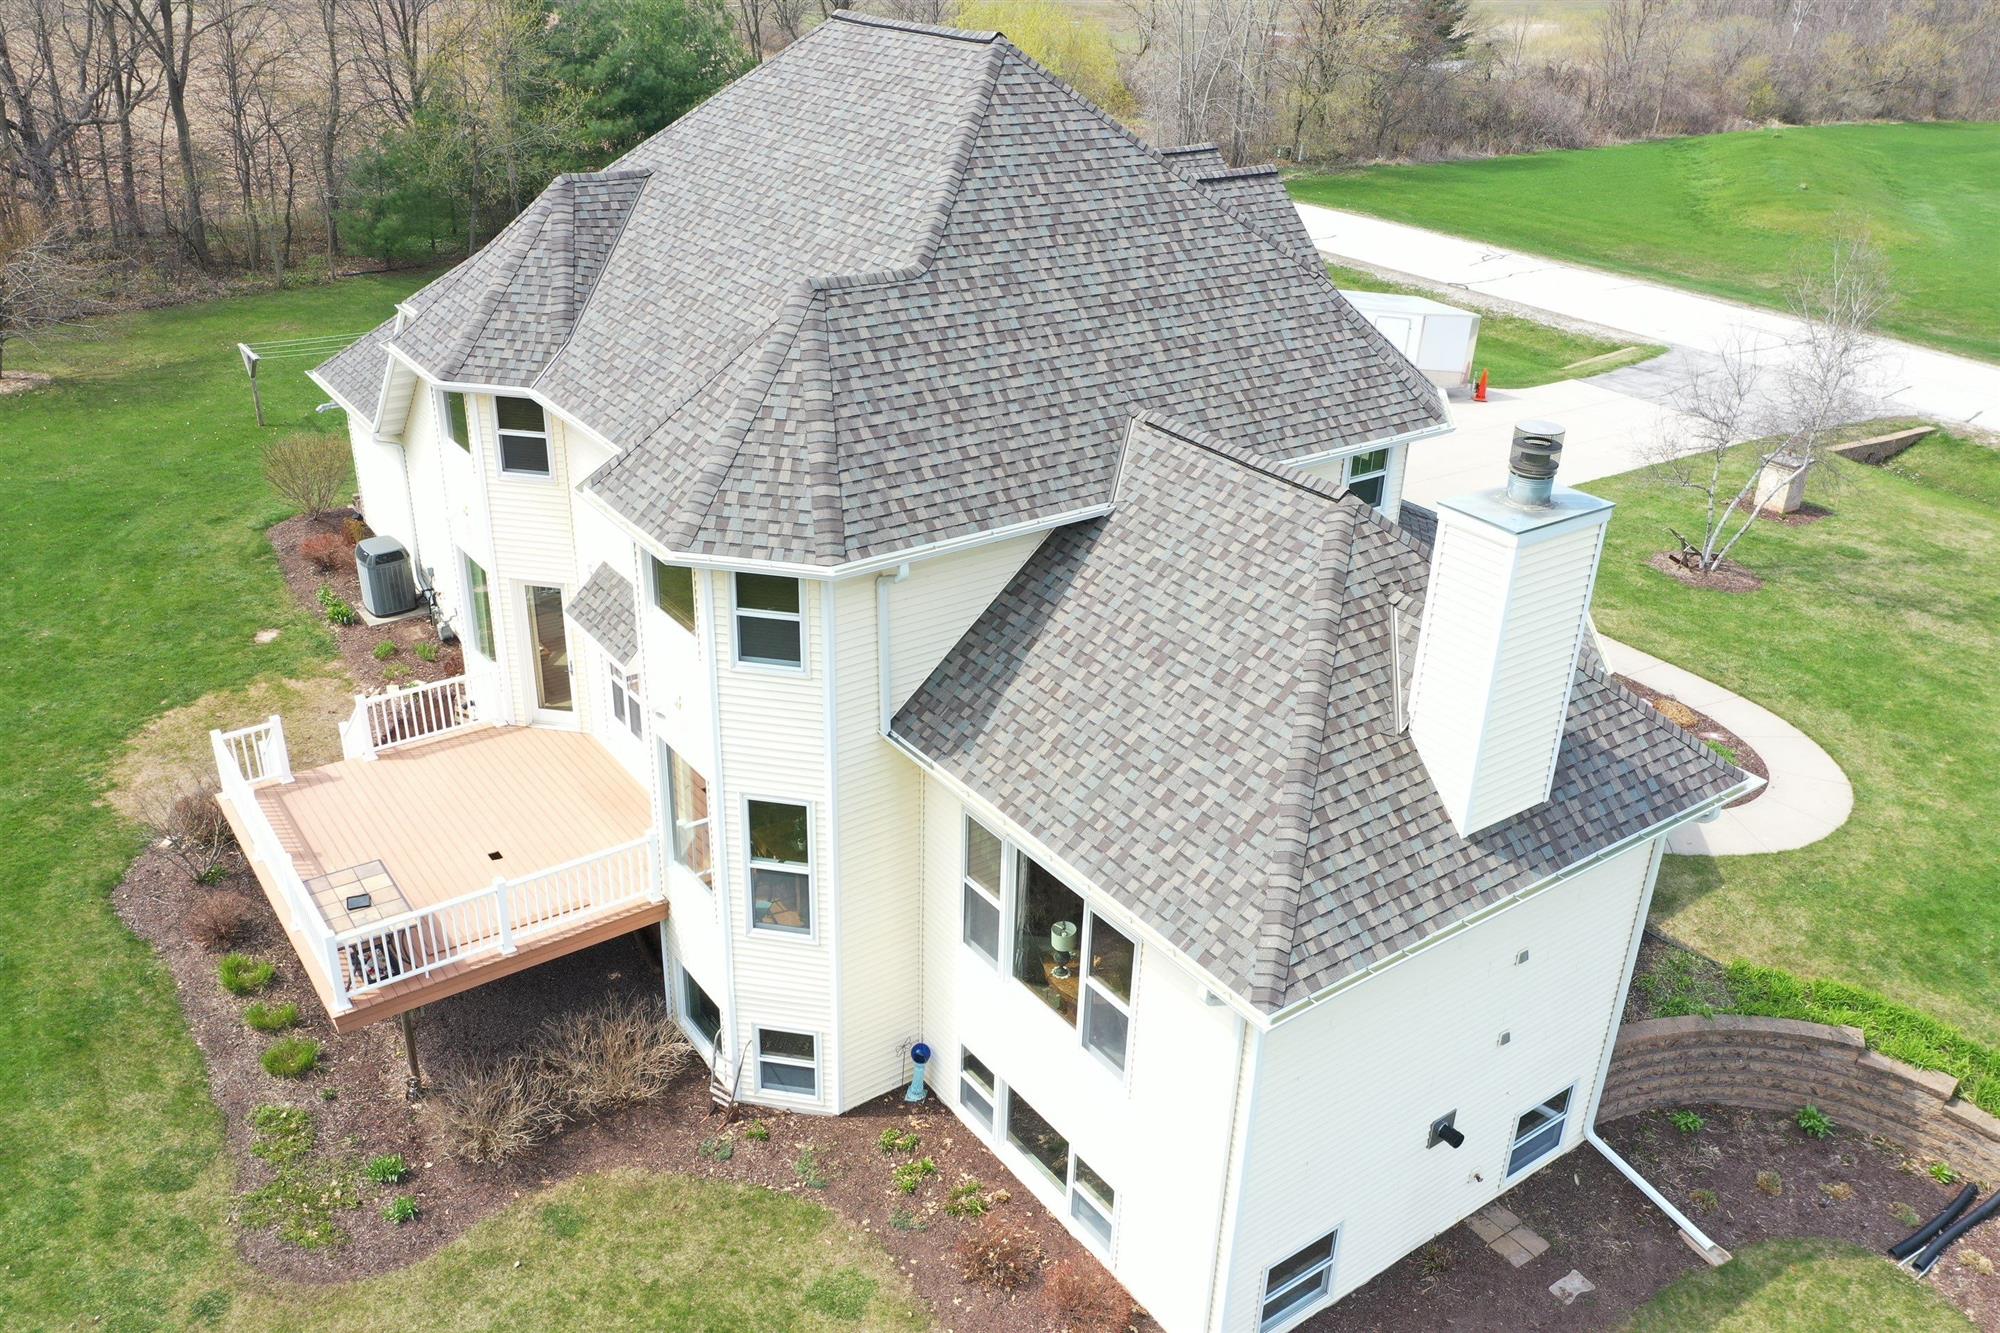 Large multi-story home with white siding and grey asphalt shingled roofing in Green Bay, WI